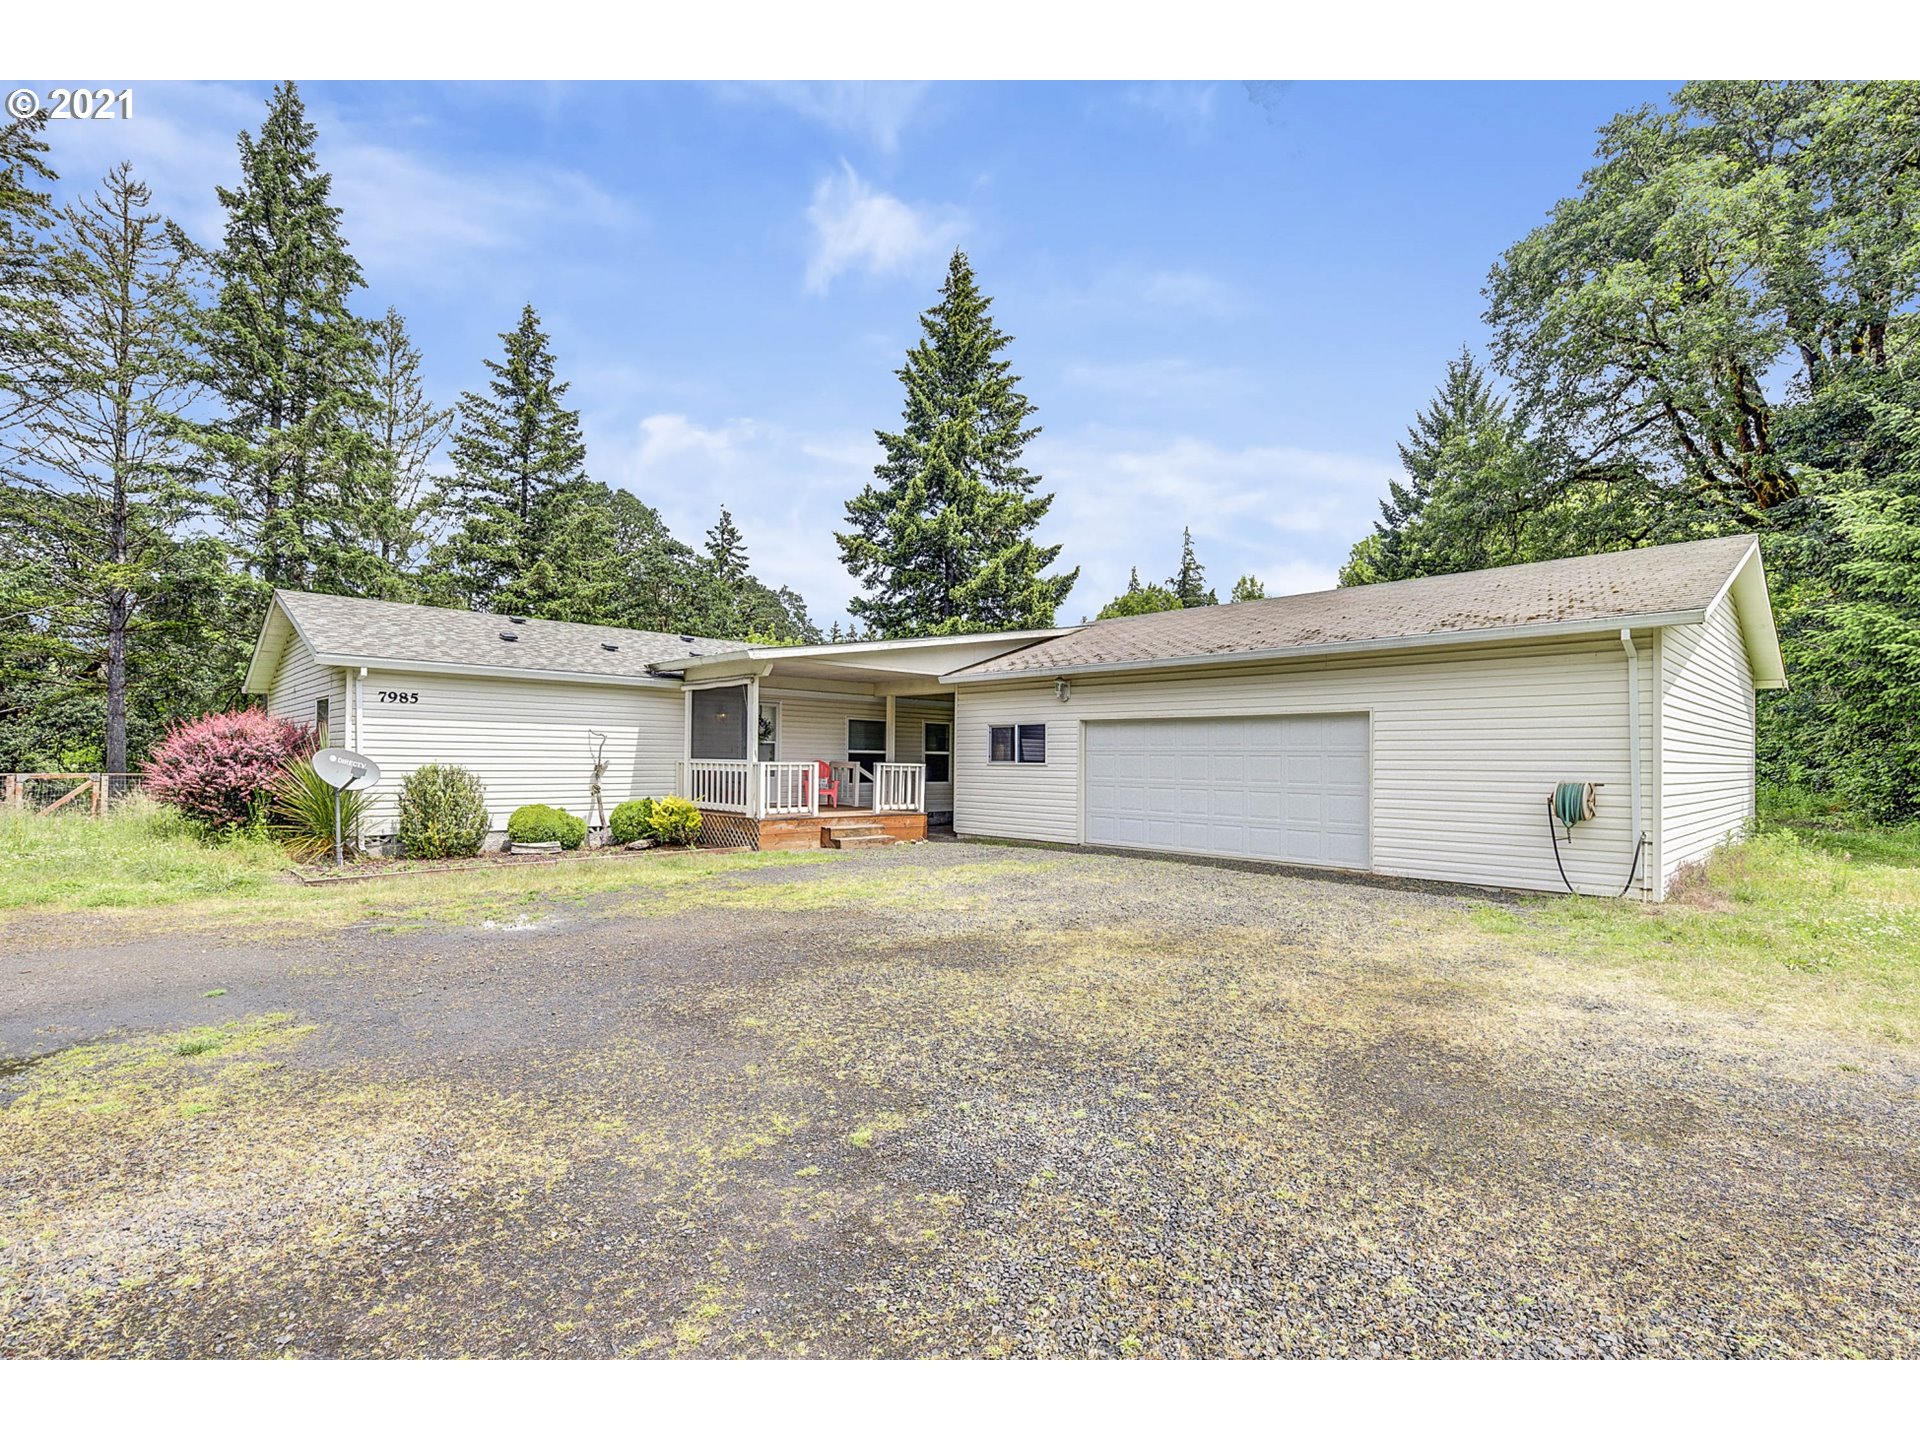 7985 SAWTELL RD (1 of 23)